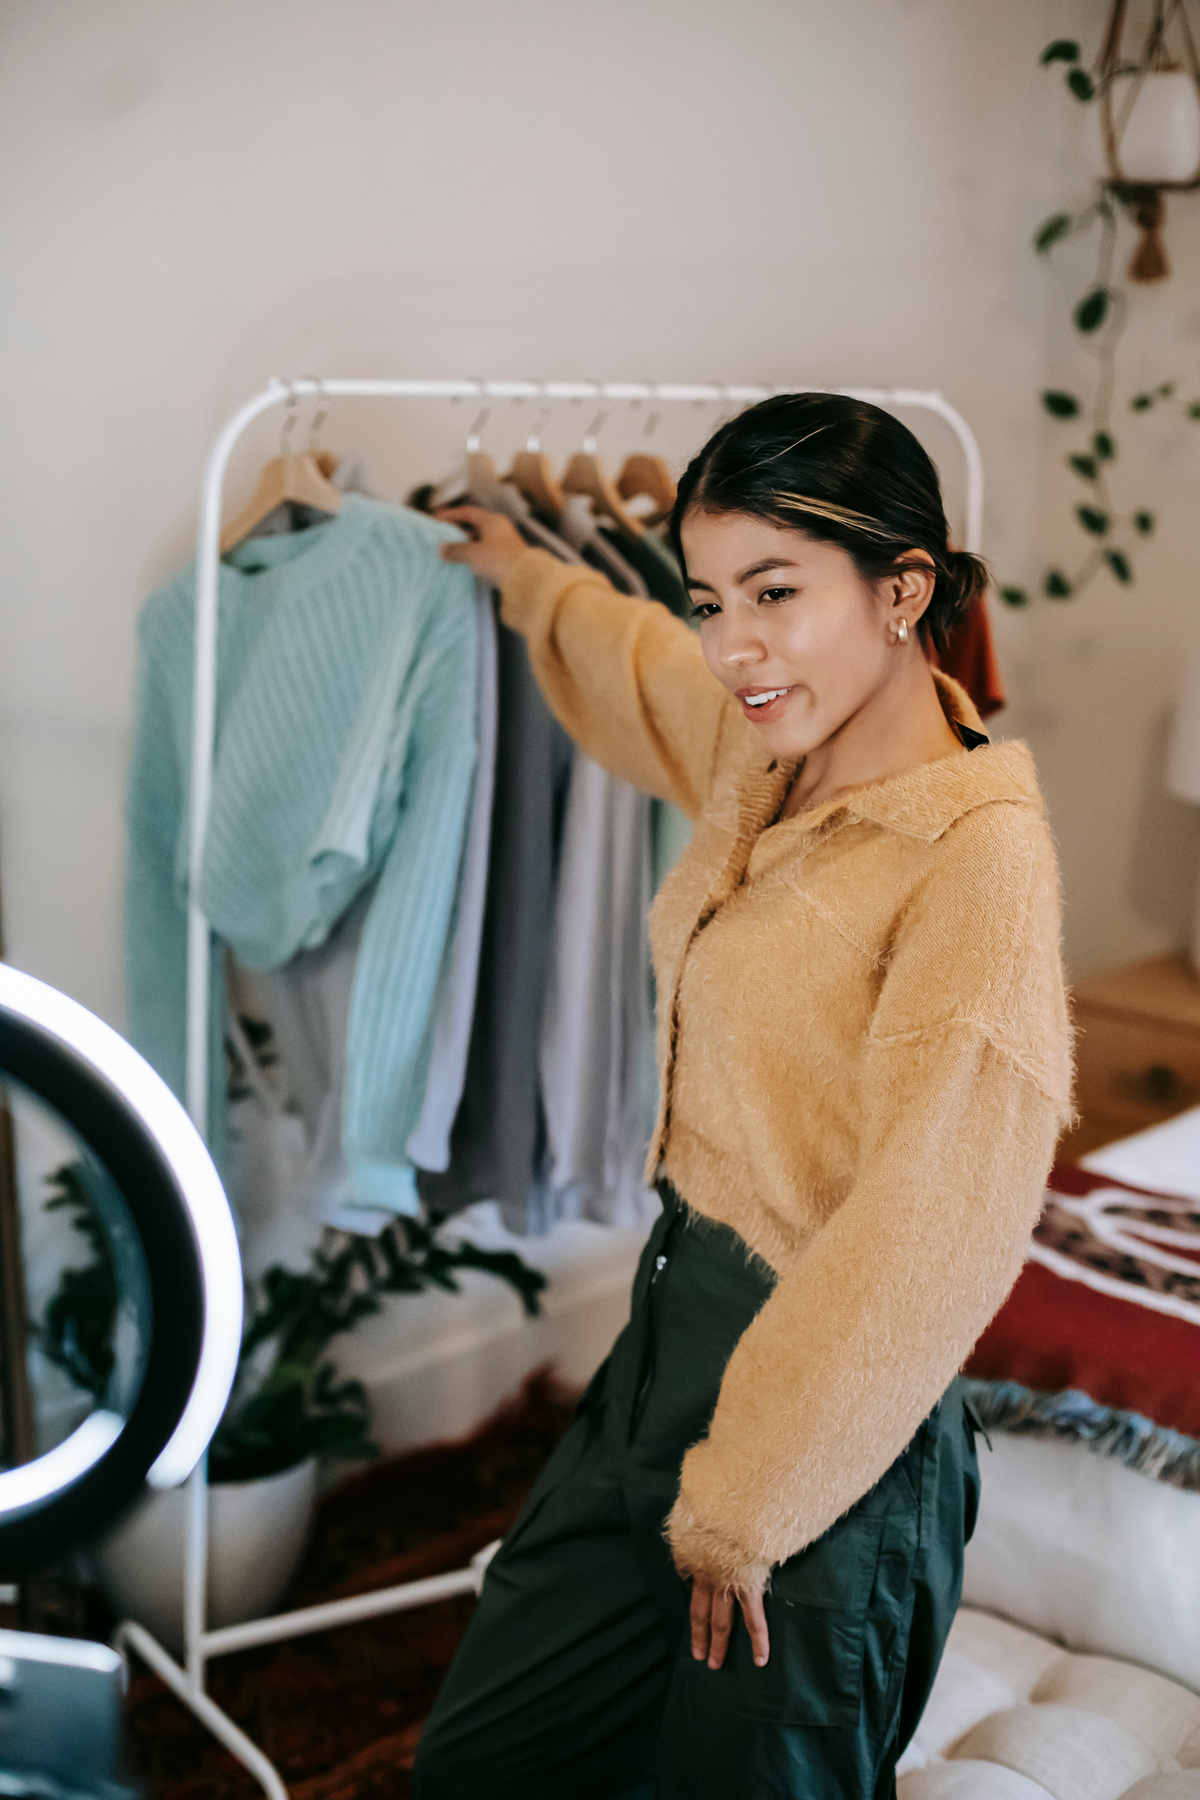 Trendy smiling woman taking clothes from rail while shooting video